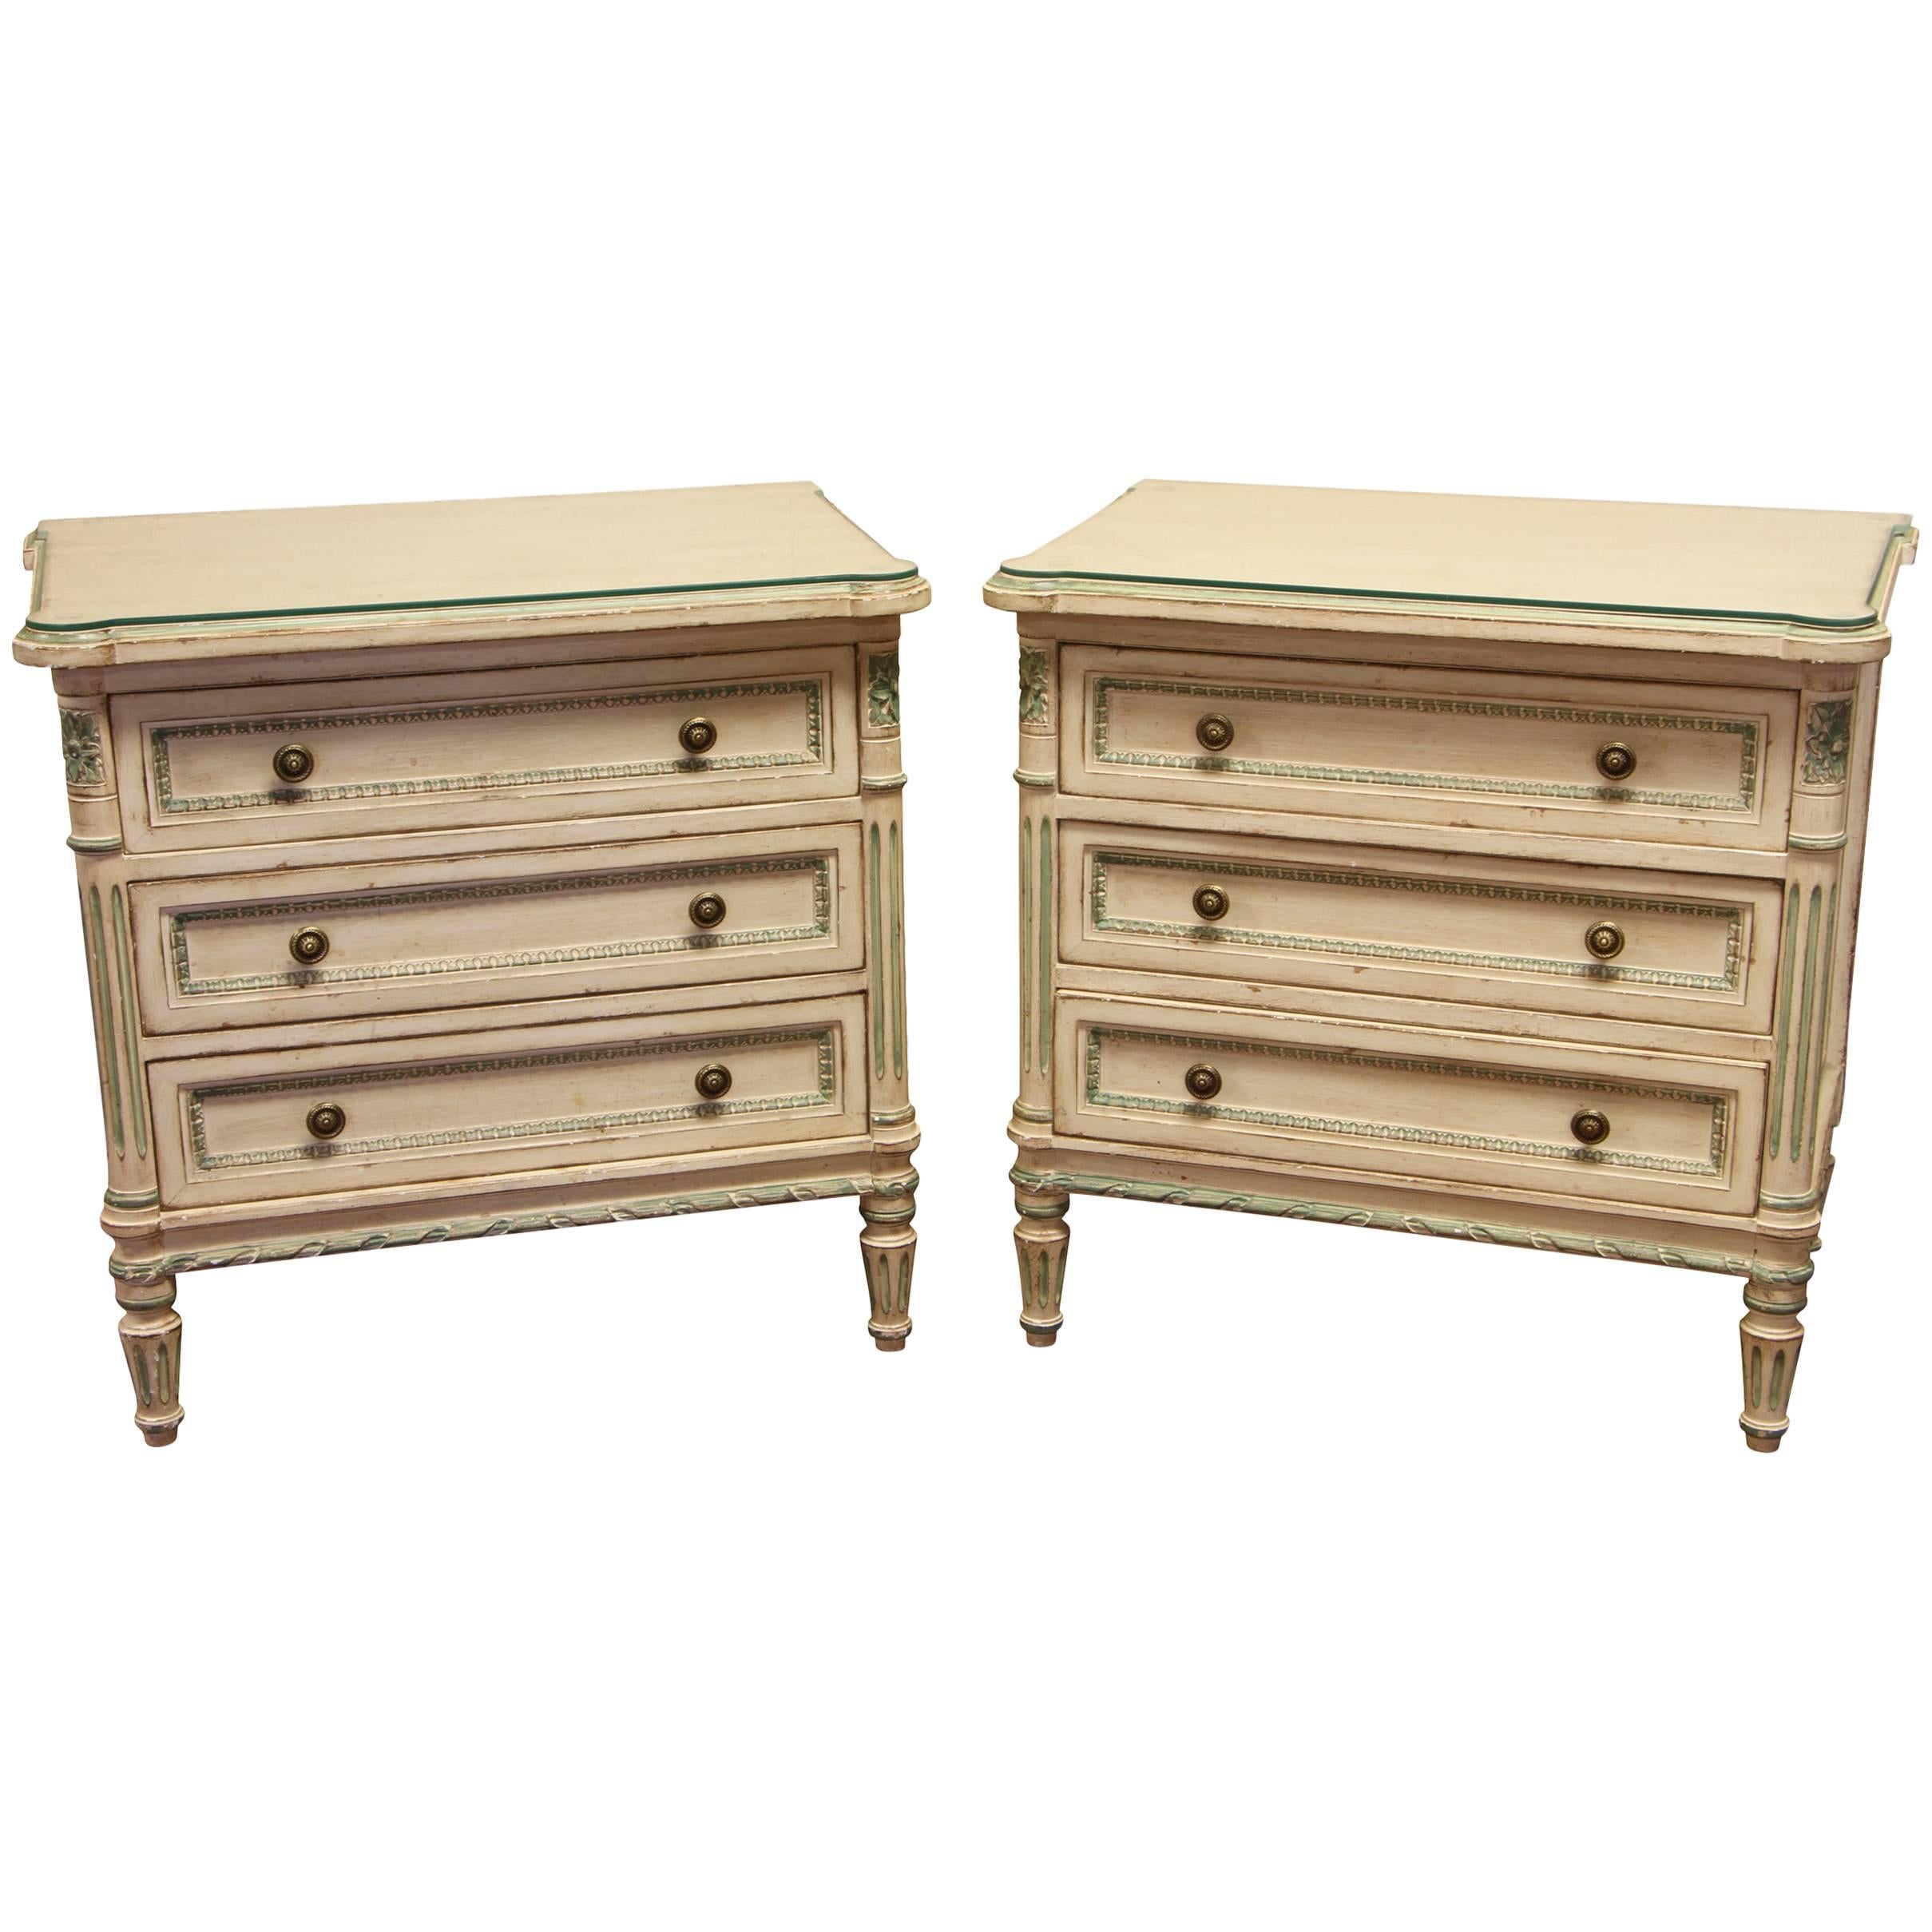 Pair of Quality Faux Paint Decorated Drawer Stands